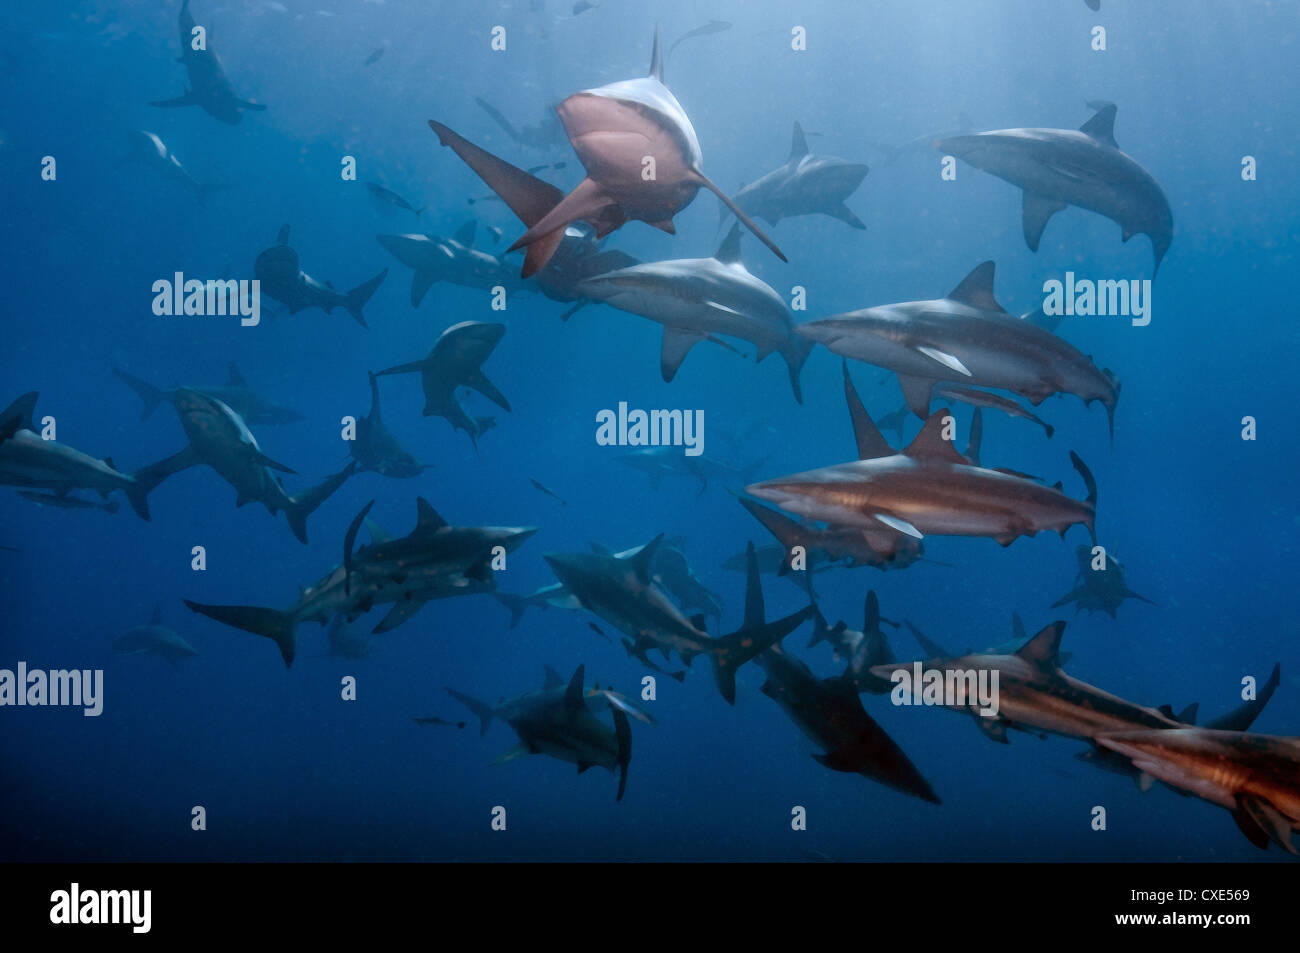 Big group of sharks circling around in the water Stock Photo